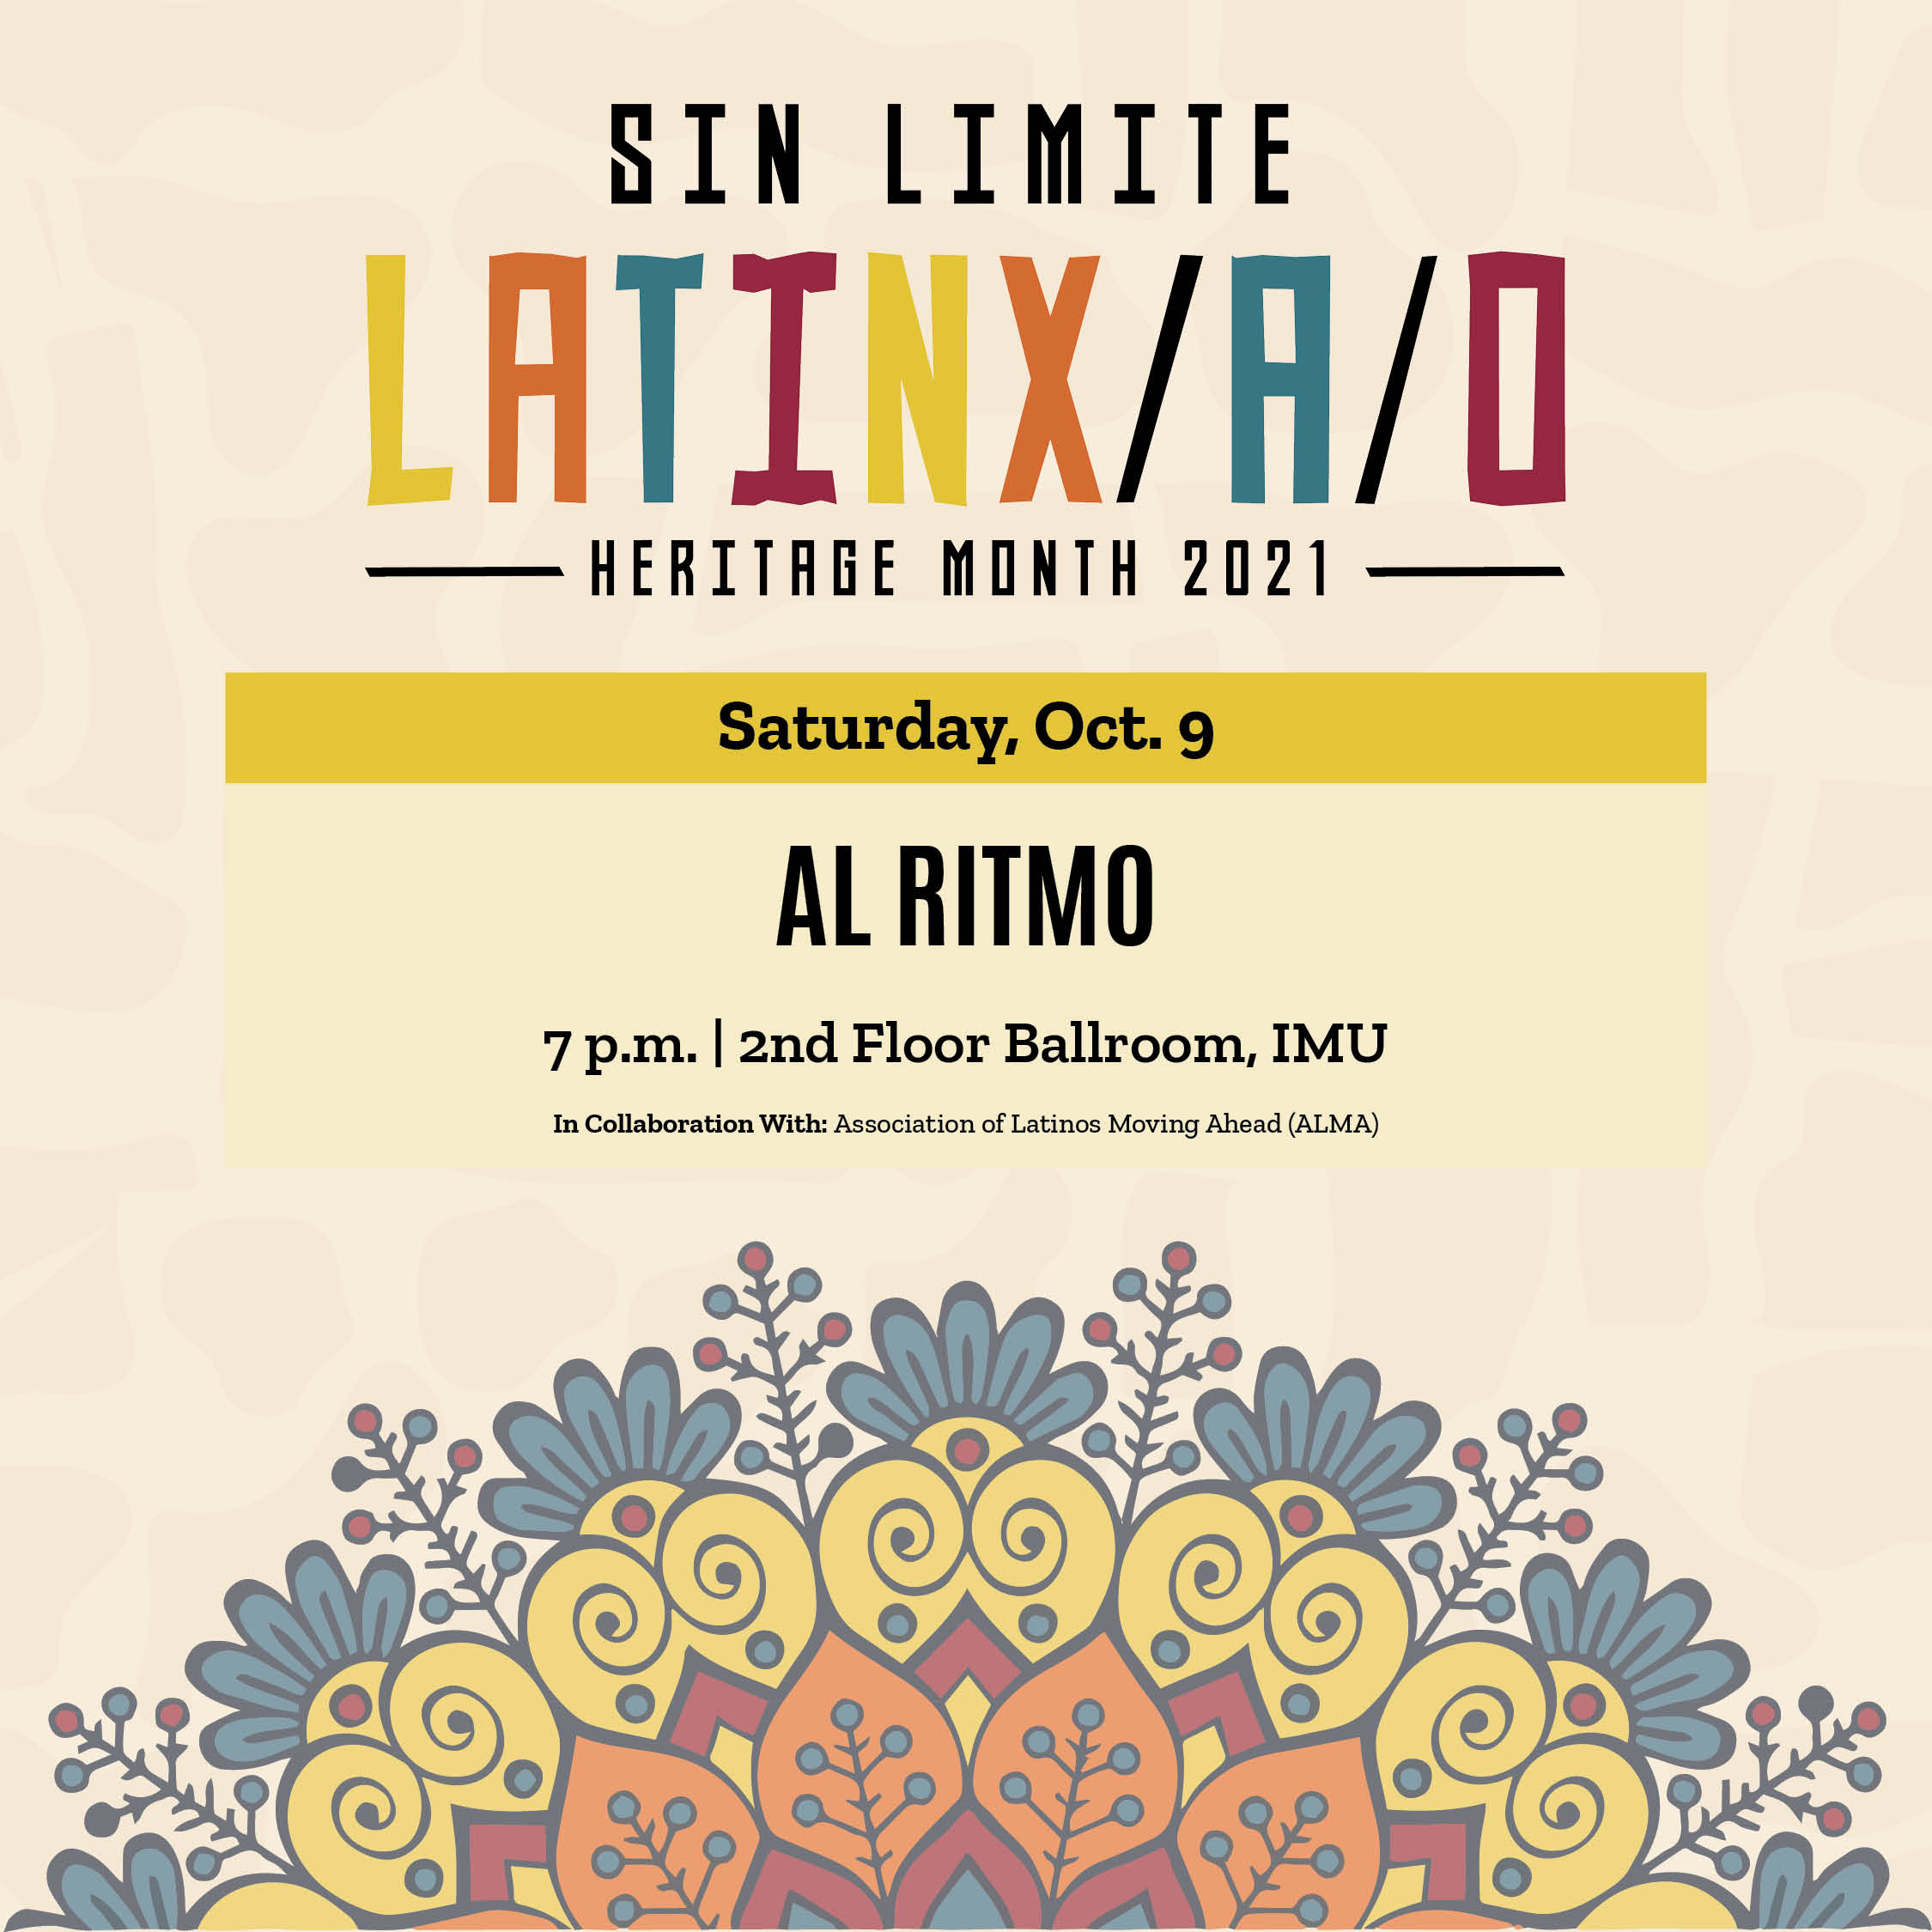 A floral design graphic with and text that says 'SIN LIMITE LATINX/A/O HERITAGE MONTH 2021 Saturday, Oct. 9 AL RITMO 7p.m.| 2nd Floor Ballroom, IMU p.m. I With: Association Latinos Moving Ahead (ALMA)'